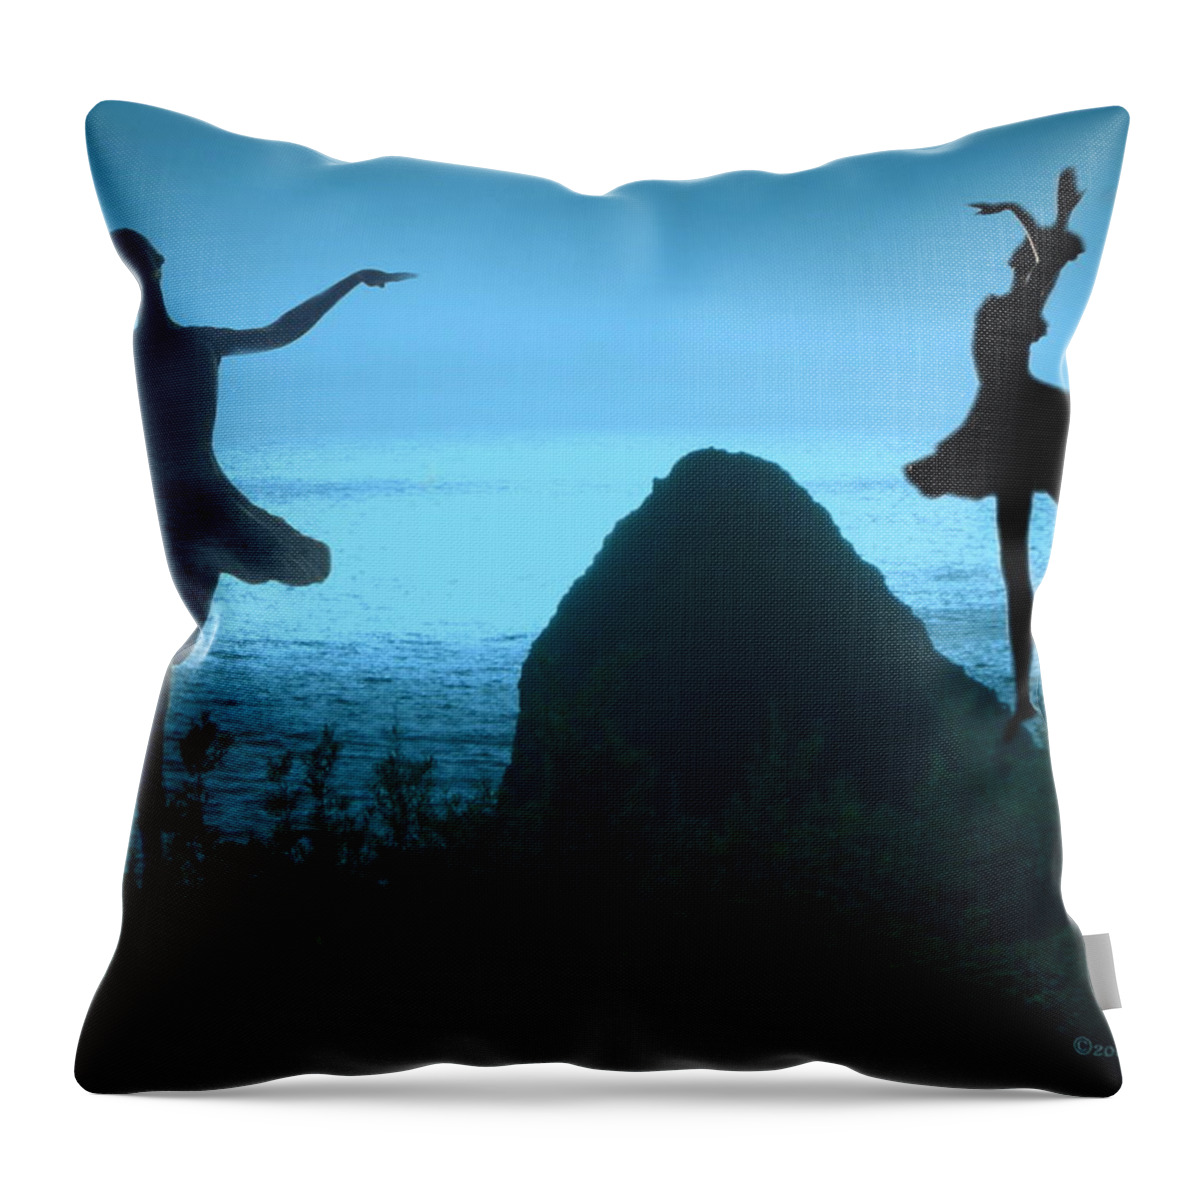 Ballerina Throw Pillow featuring the photograph Dance Of The Sea by Joyce Dickens